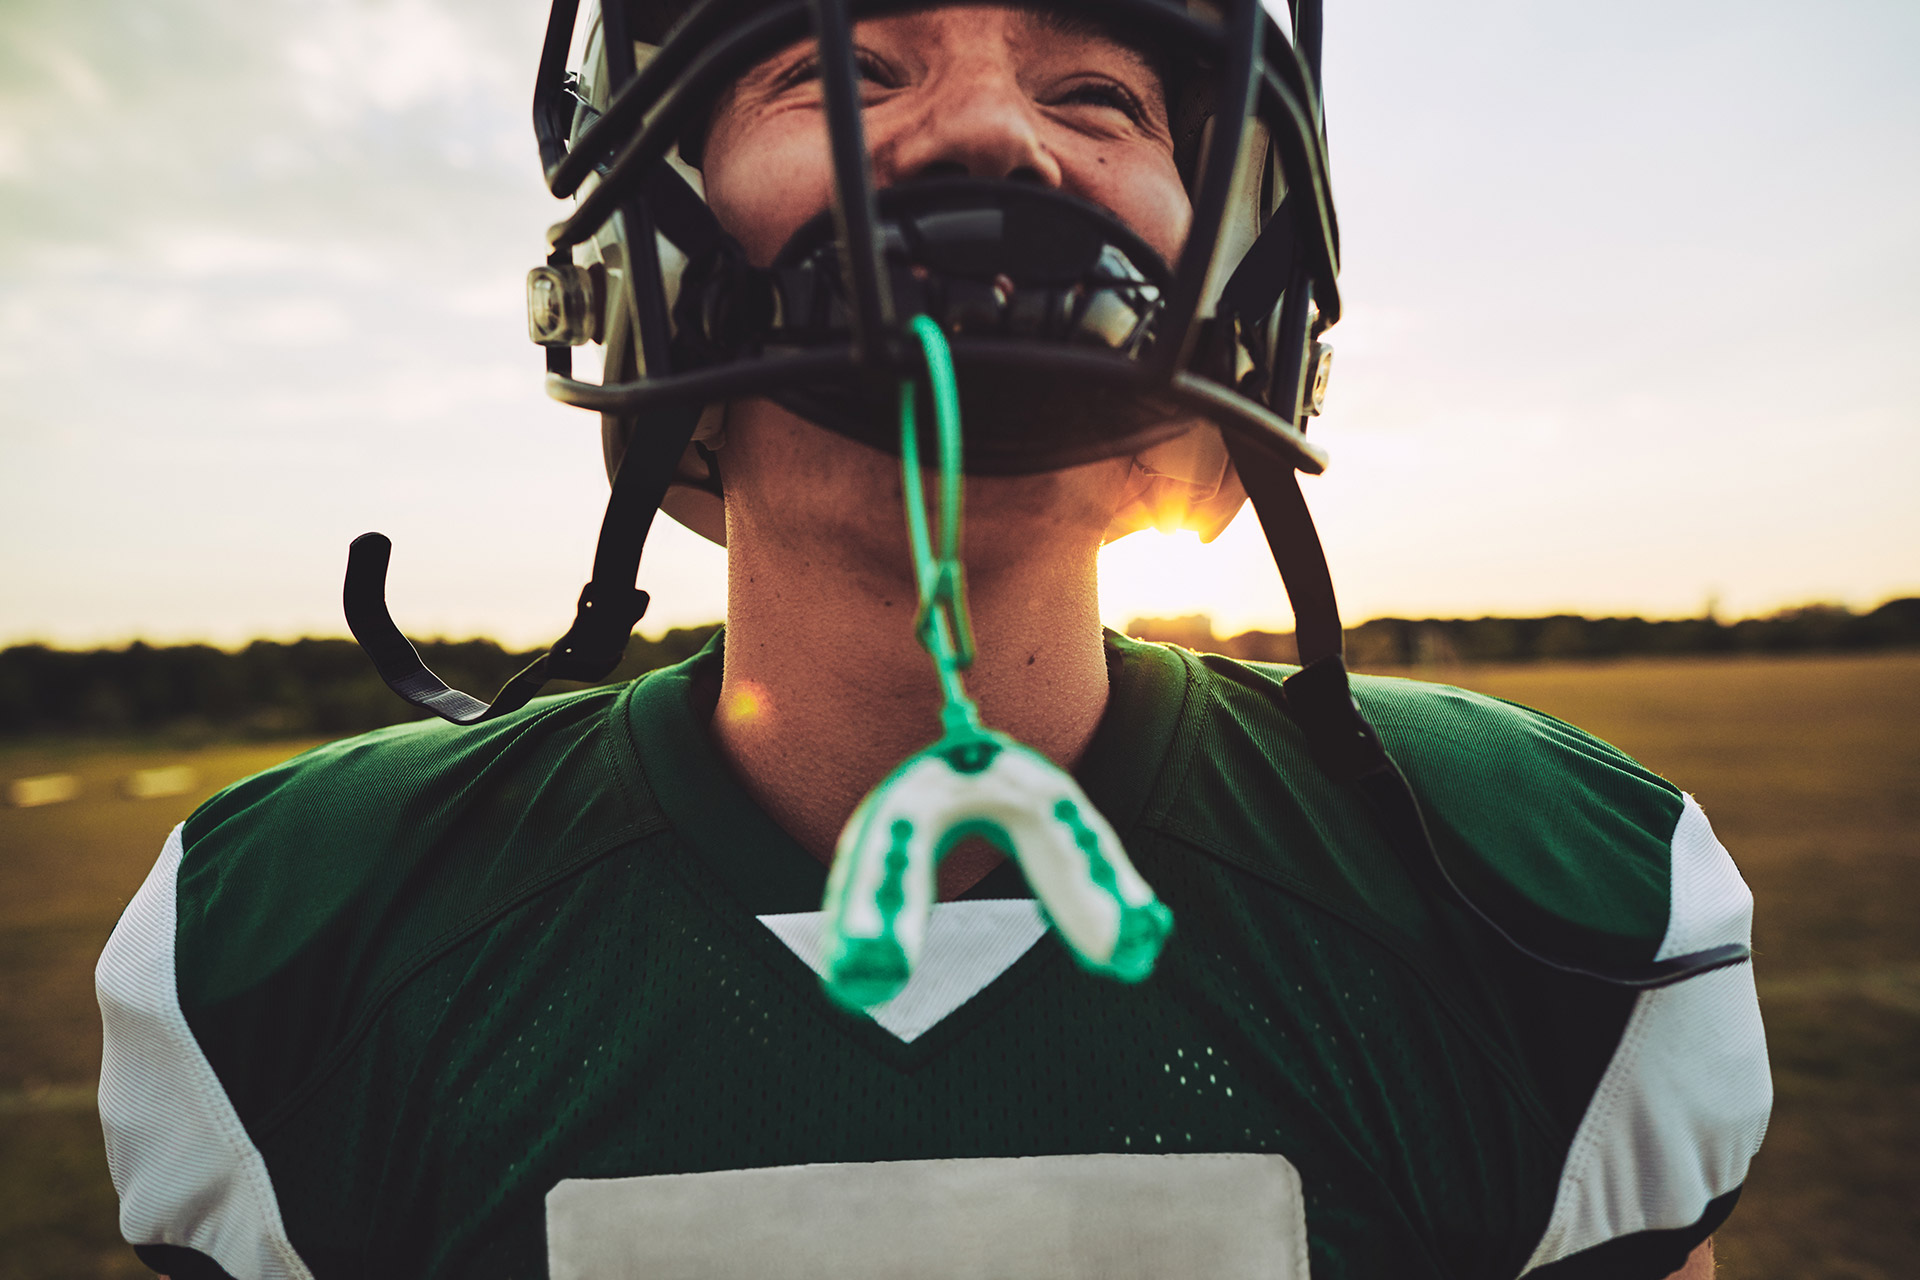 Wear a mouthguard when playing sports with braces